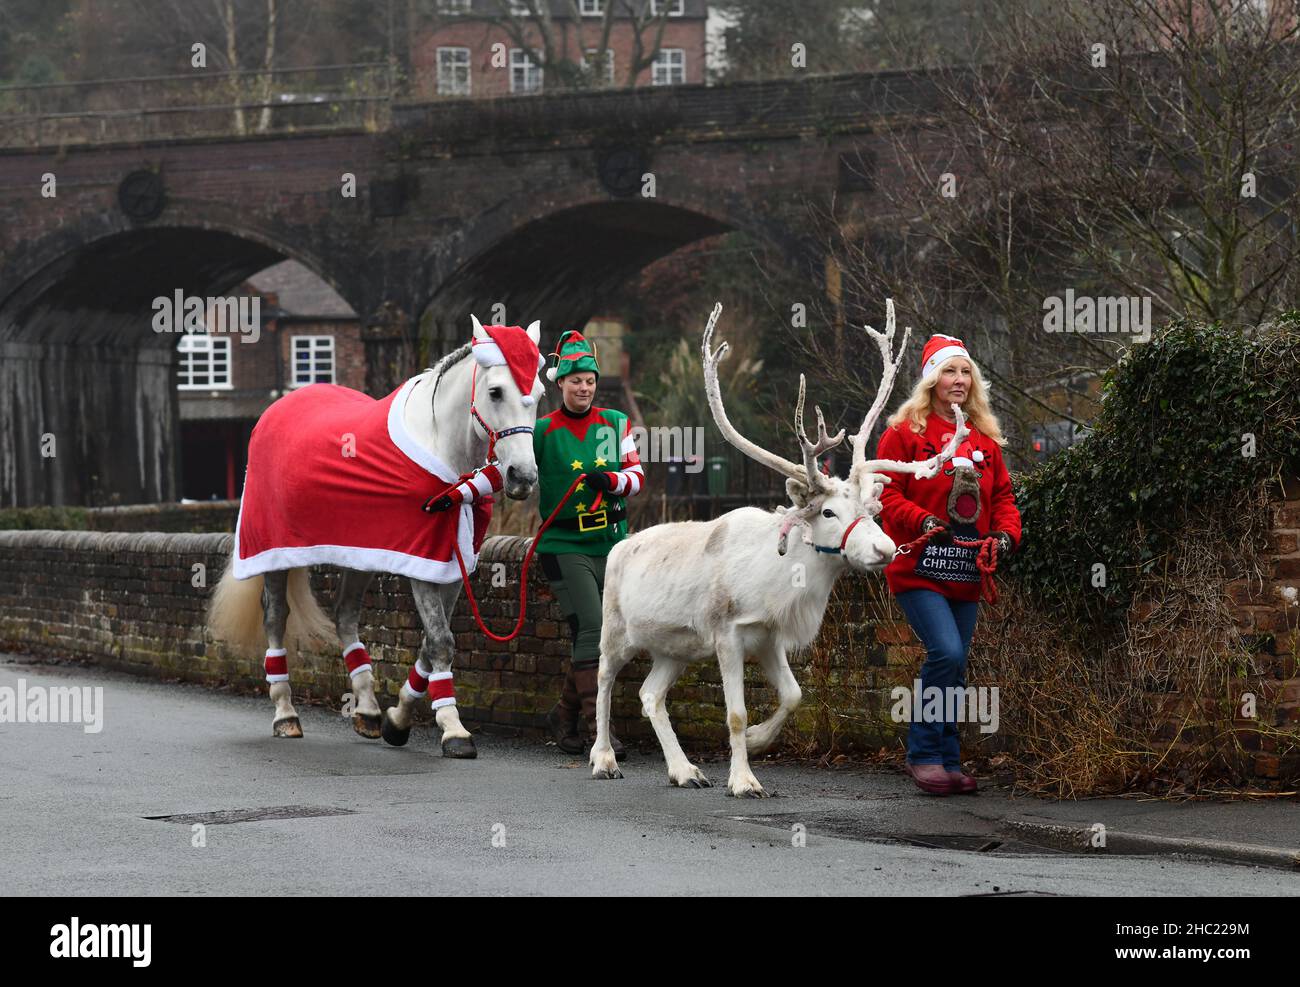 Coalbrookdale, Shropshire, Uk. White Christmas!  December 23rd 2021. Snow or no snow it's white Christmas in the village of Coalbrookdale this year. Floki the white reindeer and his stable mate Opal light up the village on their daily walk from  the nearby Sunnyside Farm with owner Diana Vincent and her daughter in law Nadine Sault. Credit: David Bagnall/Alamy Live News Stock Photo